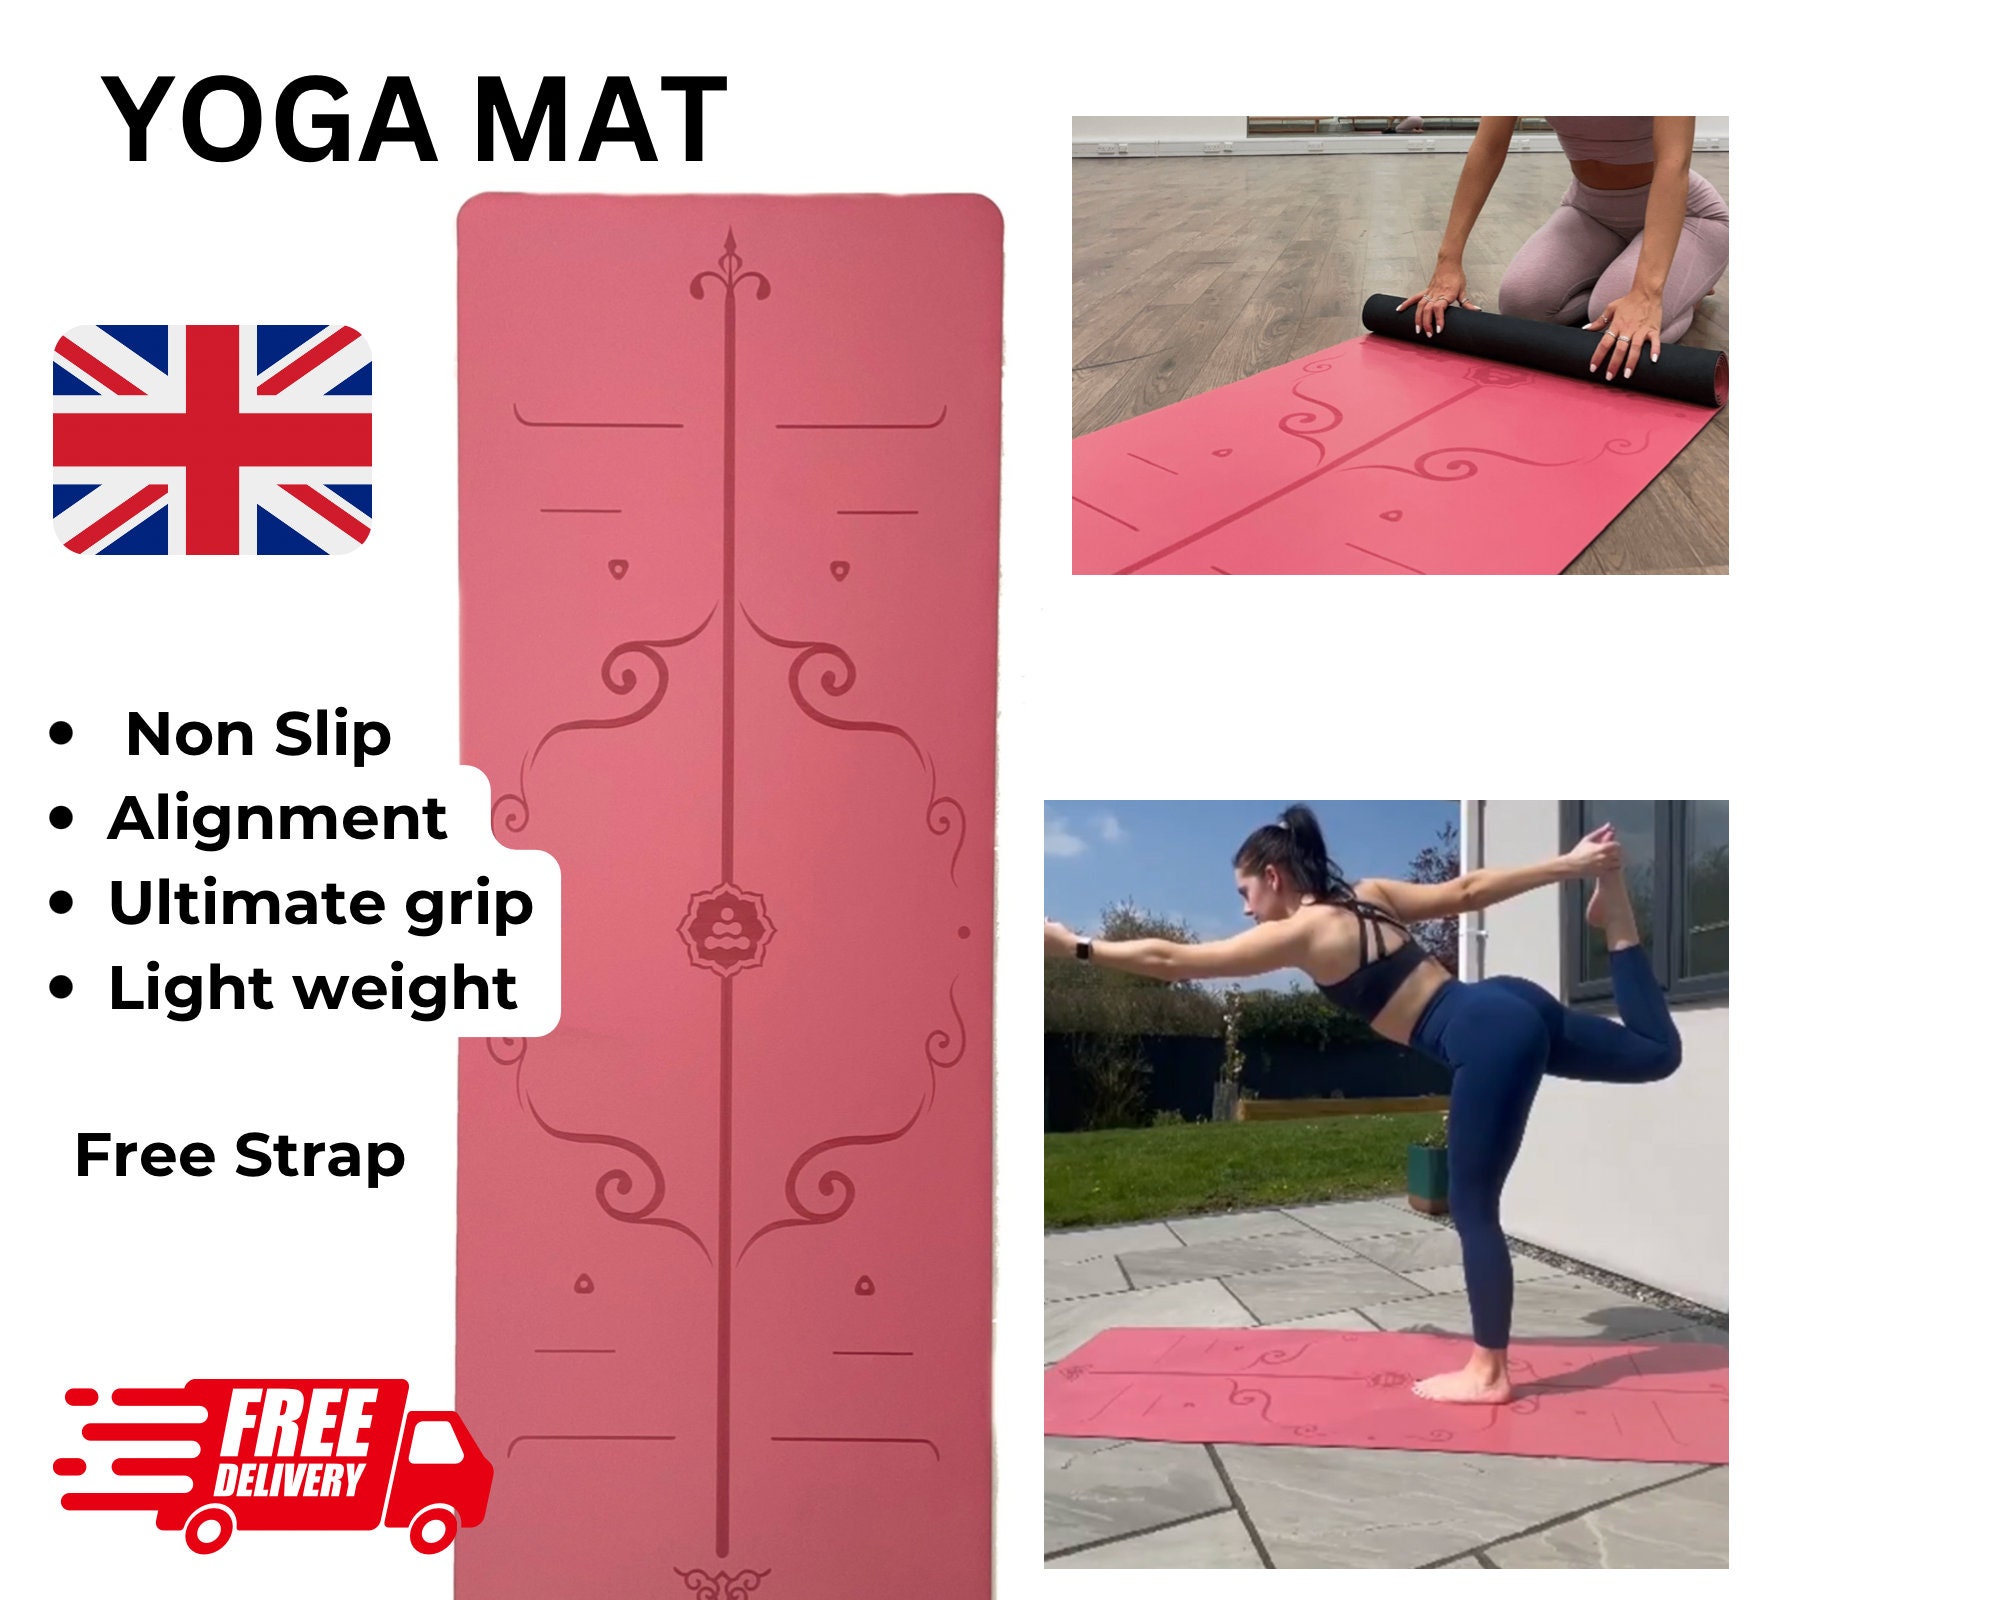 My Calm Yoga Mat Lightweight Yoga Mat Pilates, Exercise Fitness, Hot Yoga  Non Slip With Alignment Lines 185cm X 86cm X 4.2mm Pink 